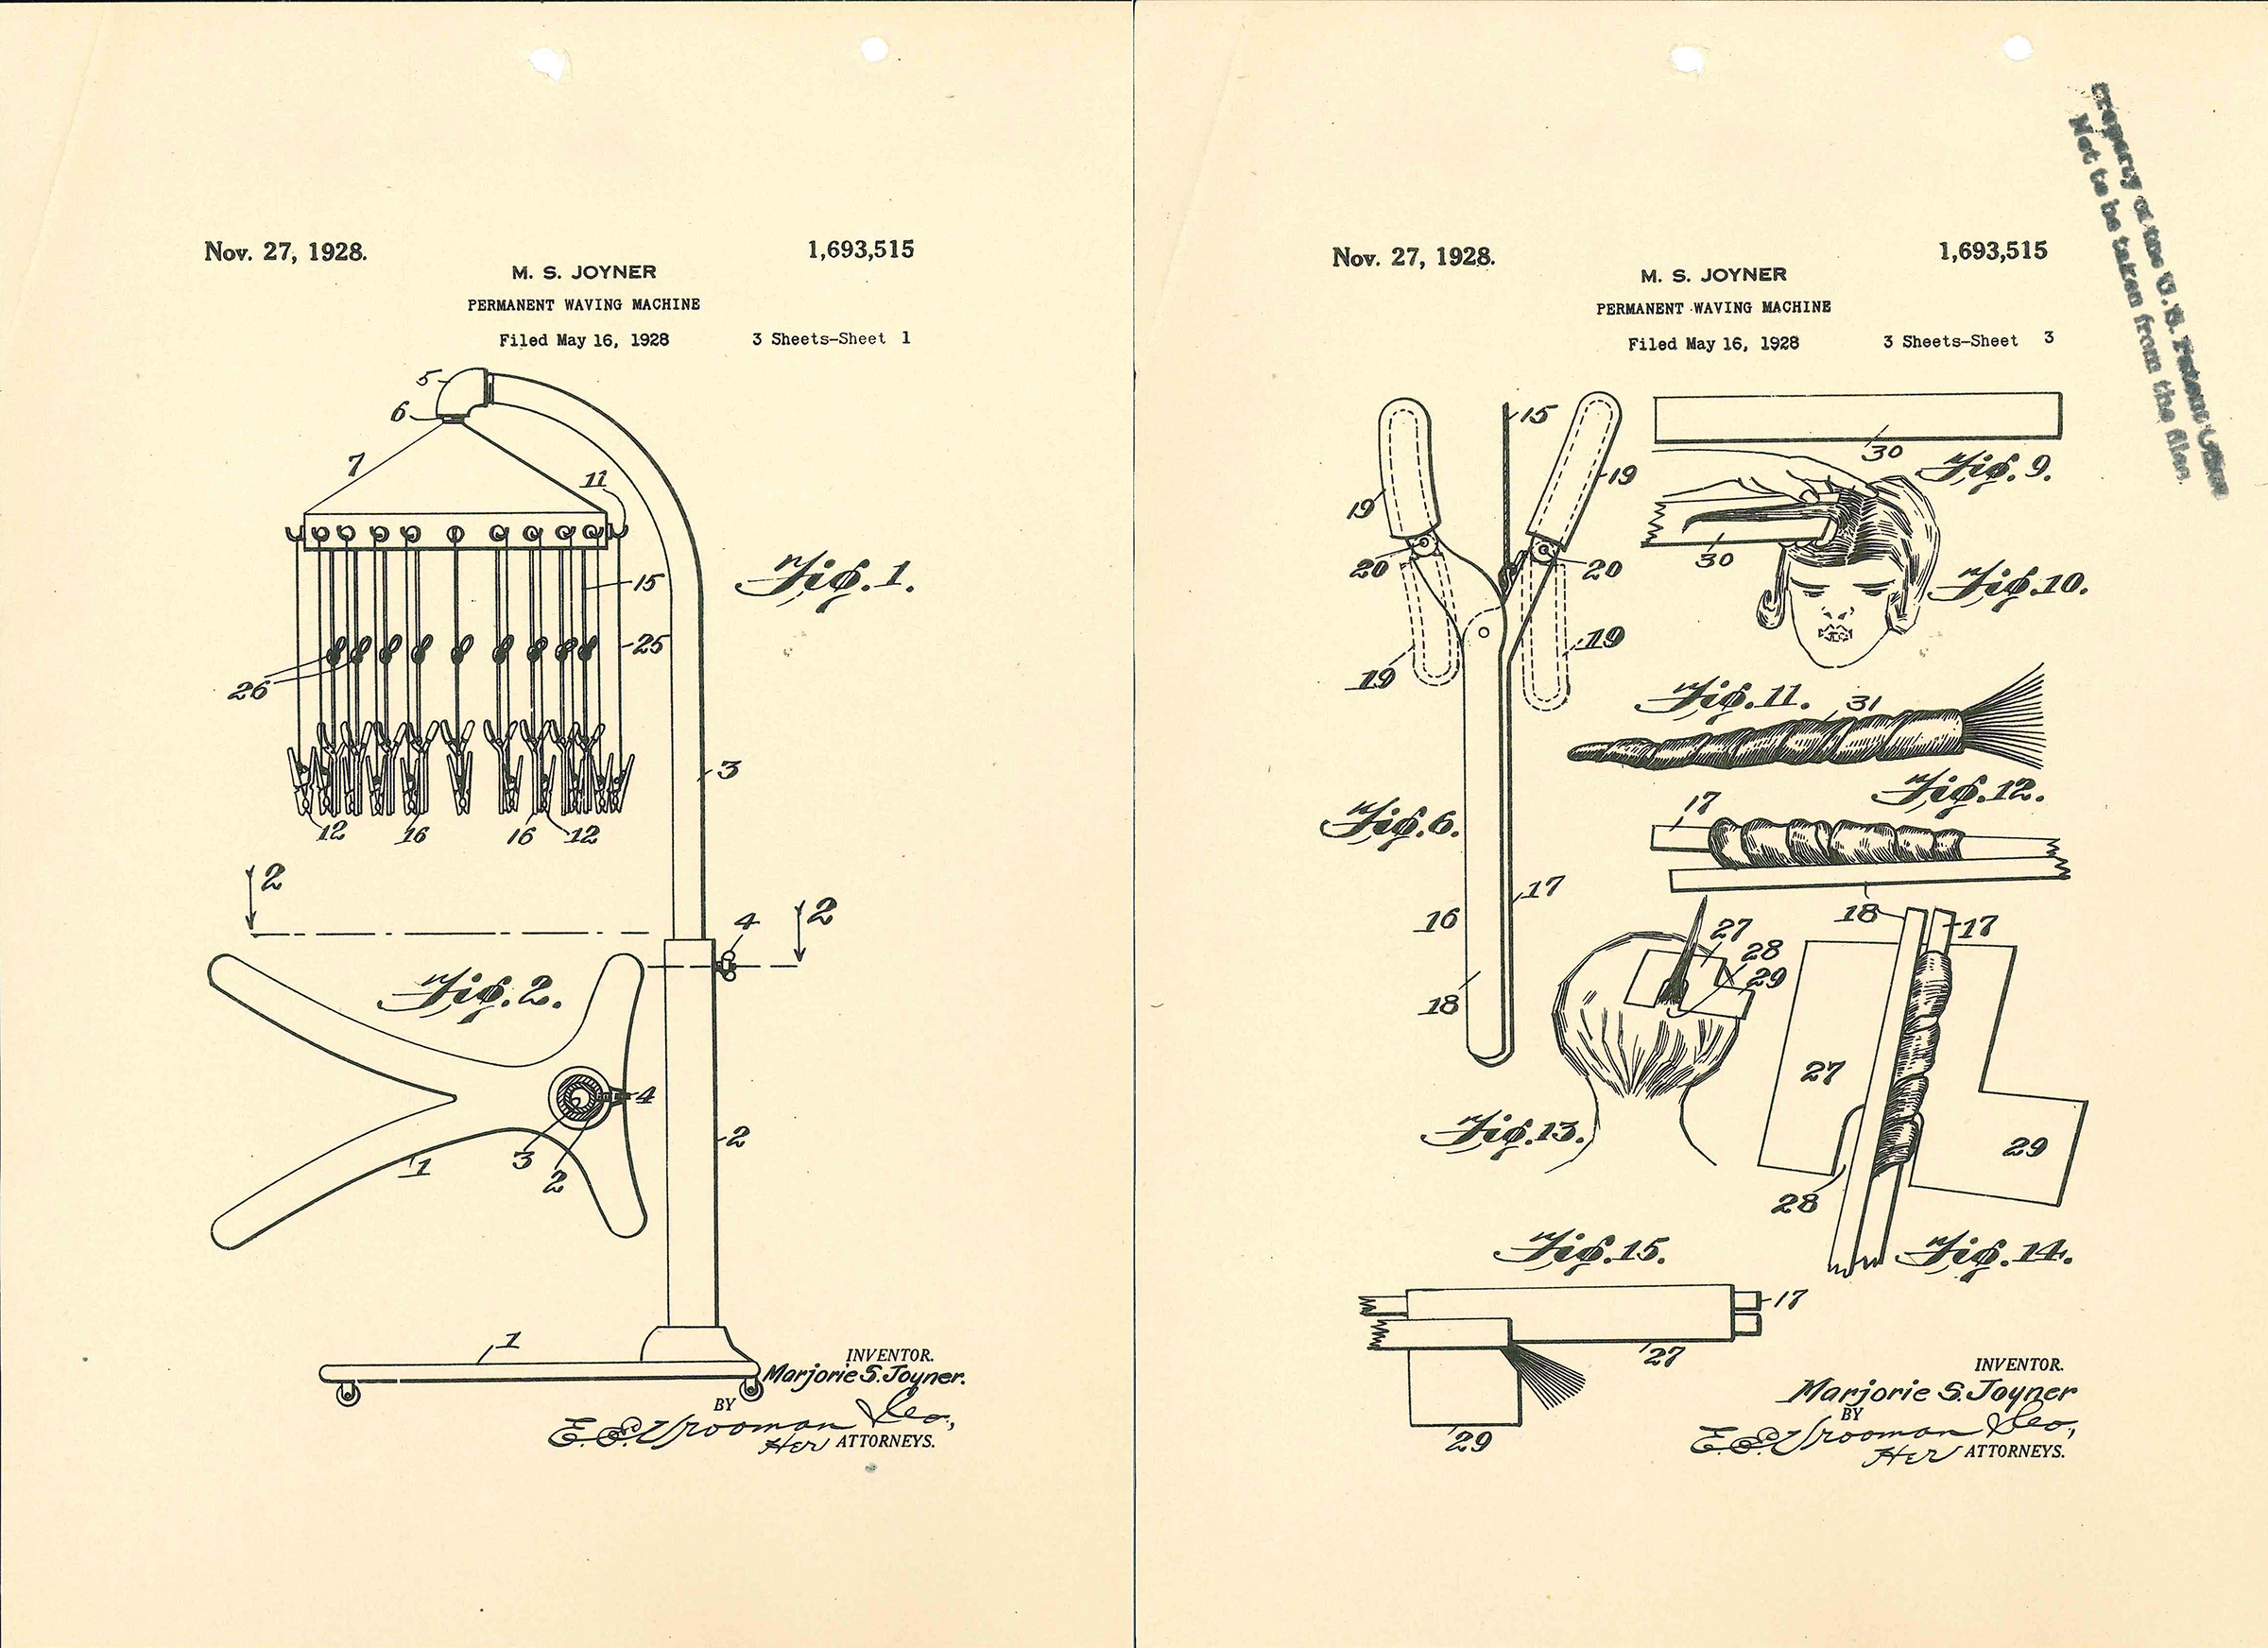 Marjorie Joyner submitted drawings for permanent wave machine, 1928, sheets 1 and 3